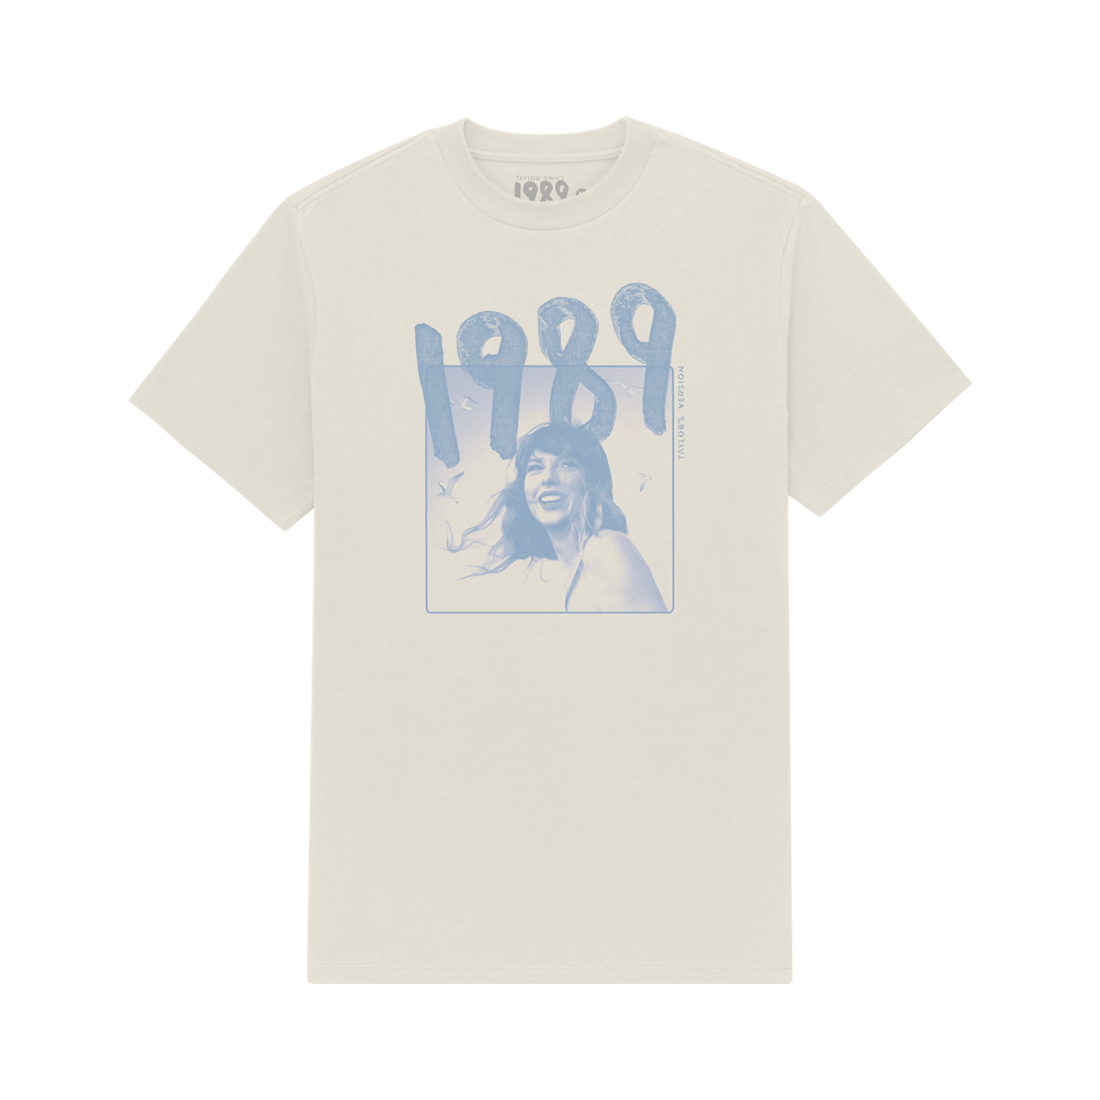 Taylor Swift - 1989 (Taylor's Version) Off White Photo T-Shirt